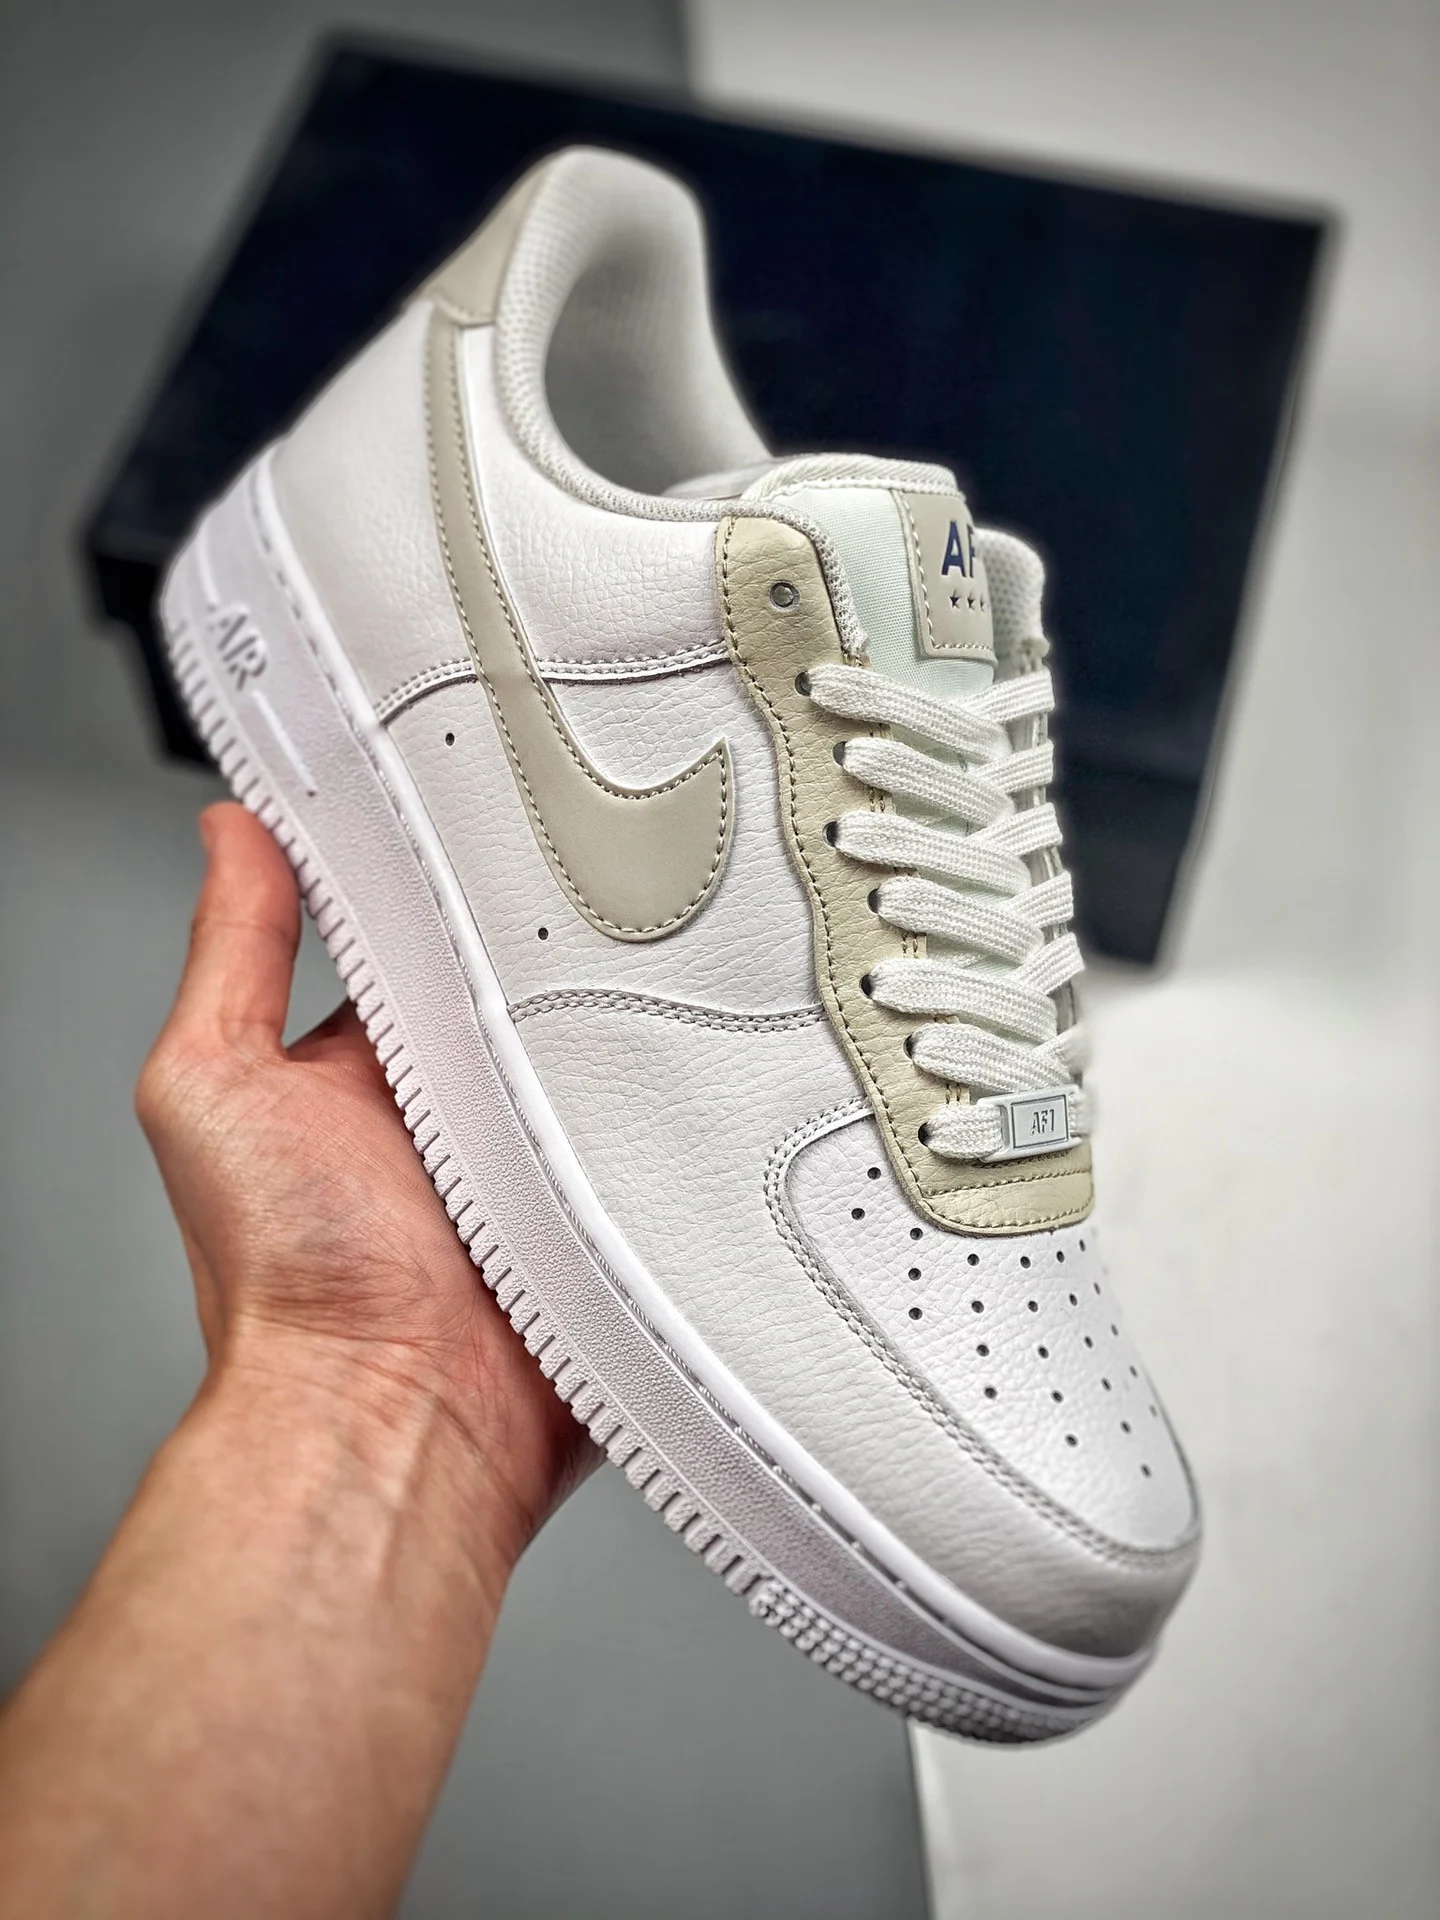 Nike Air Force 1 Low White Light Bone 315115-168 For Sale